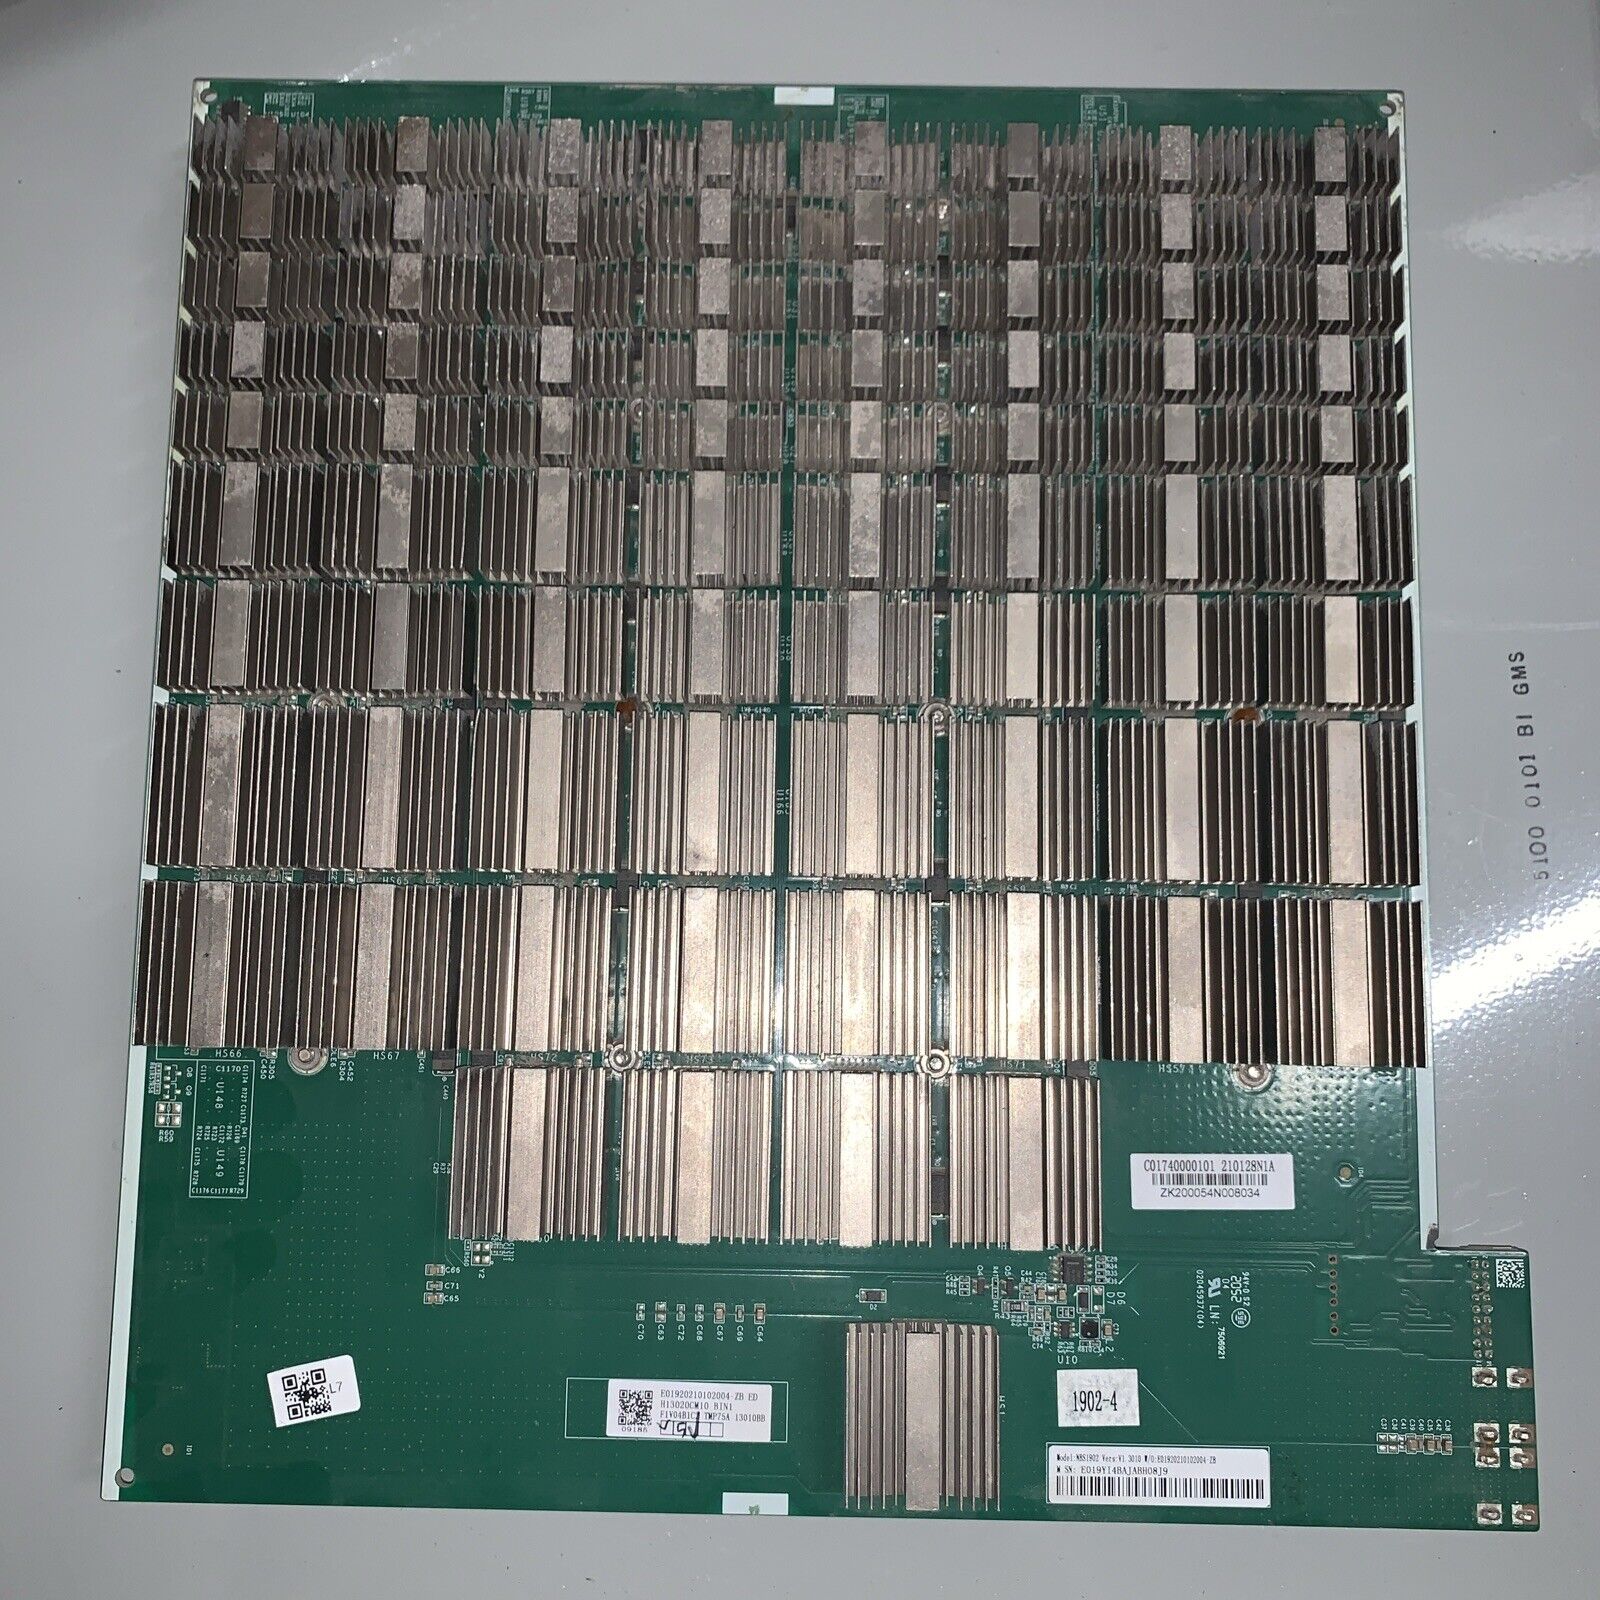 S19 Hash board for Bitmain Antminer S19 110TH BTC ASIC bitcoin miner (Qty)